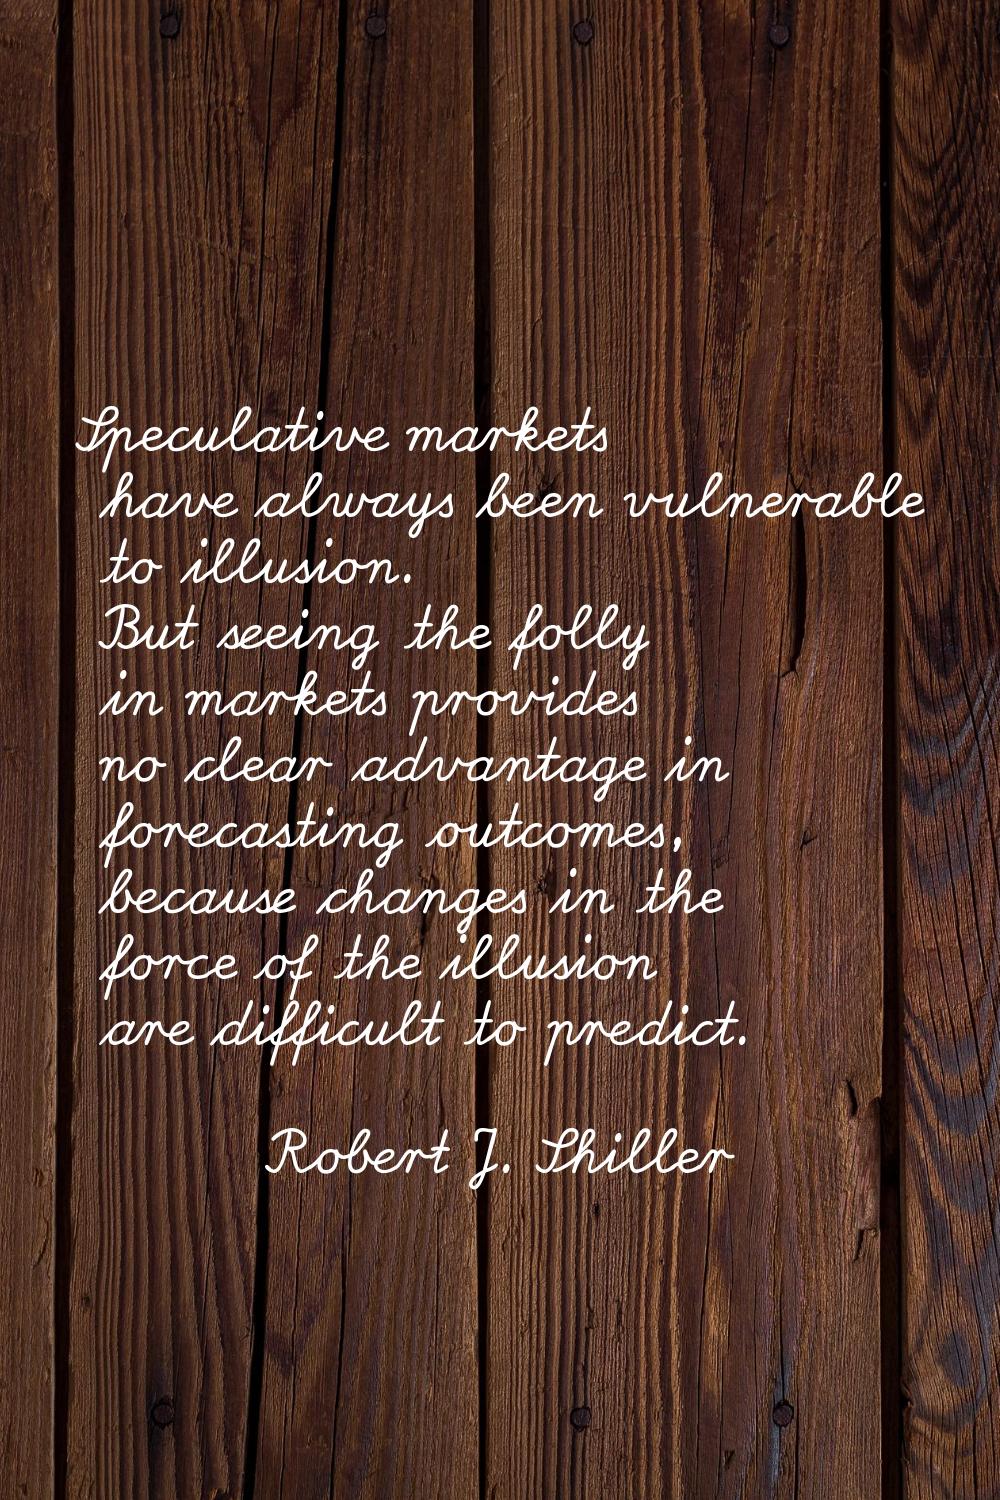 Speculative markets have always been vulnerable to illusion. But seeing the folly in markets provid